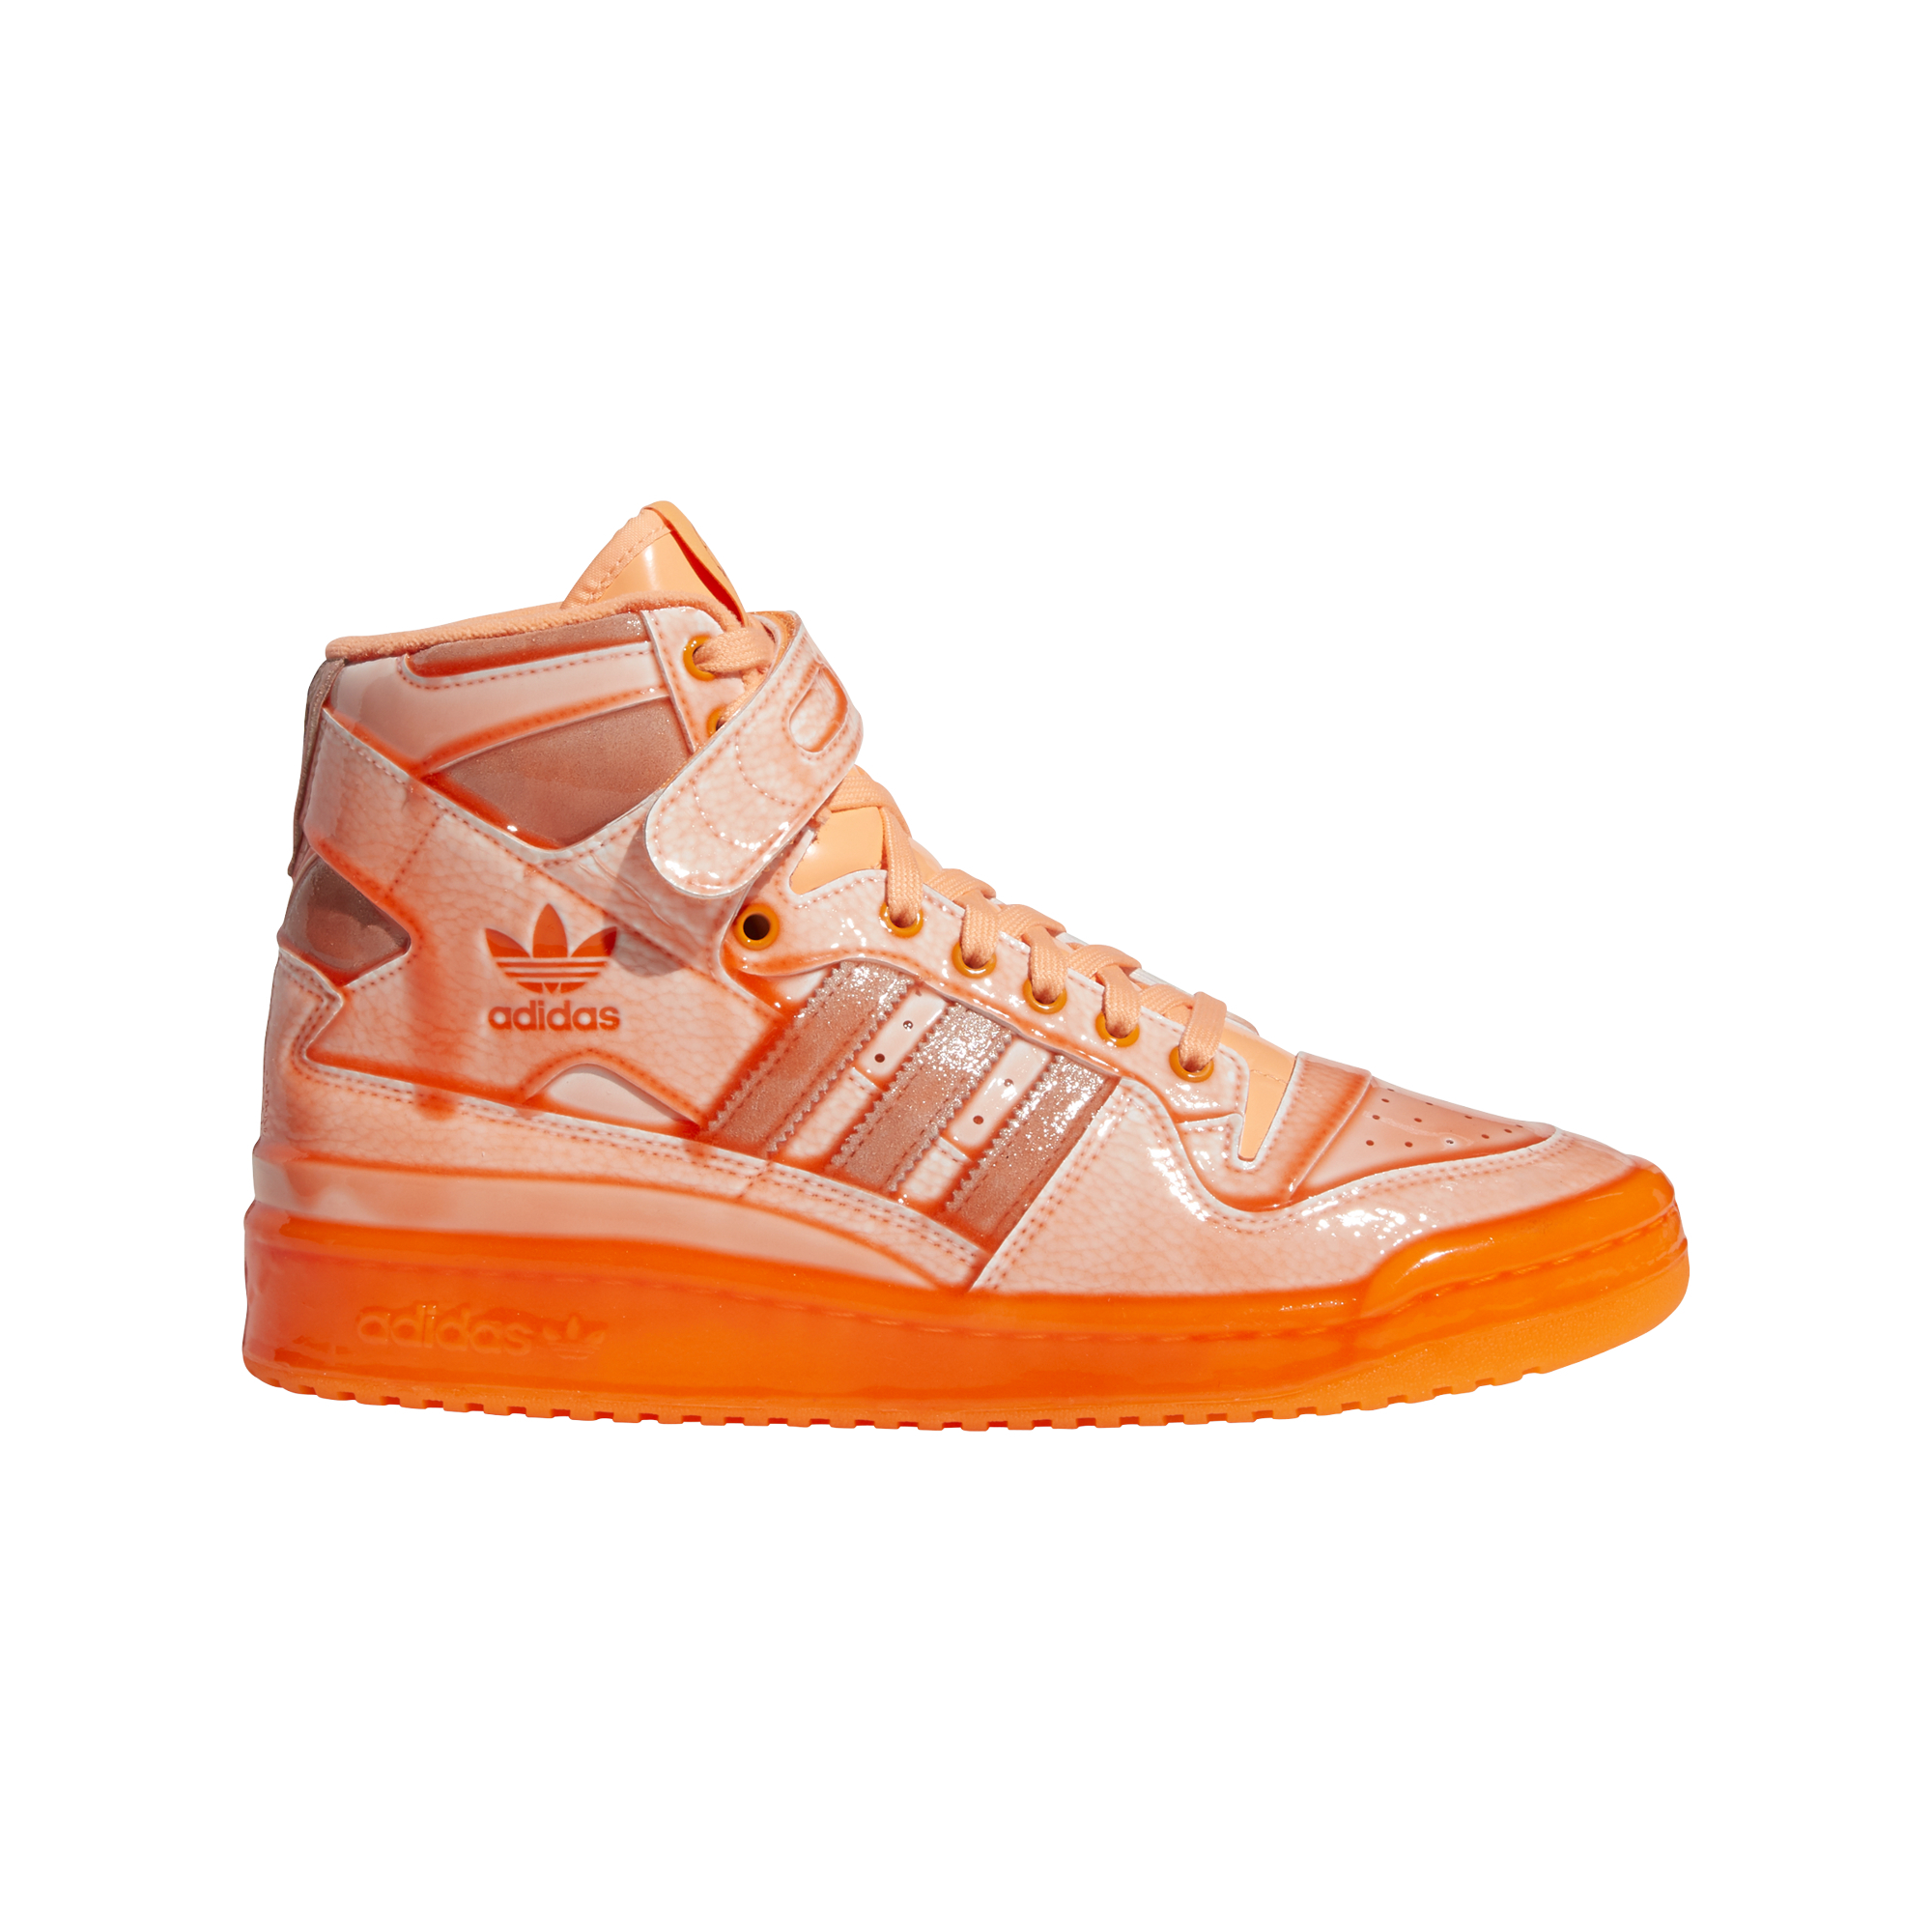 Online Shopping Kuwait | Adidas, Reebok, Nike, Puma & More | Free Delivery | Easy Exchange Returns | SNKR ADIDAS MEN'S JEREMY SCOTT FORUM DIPPED SHOES